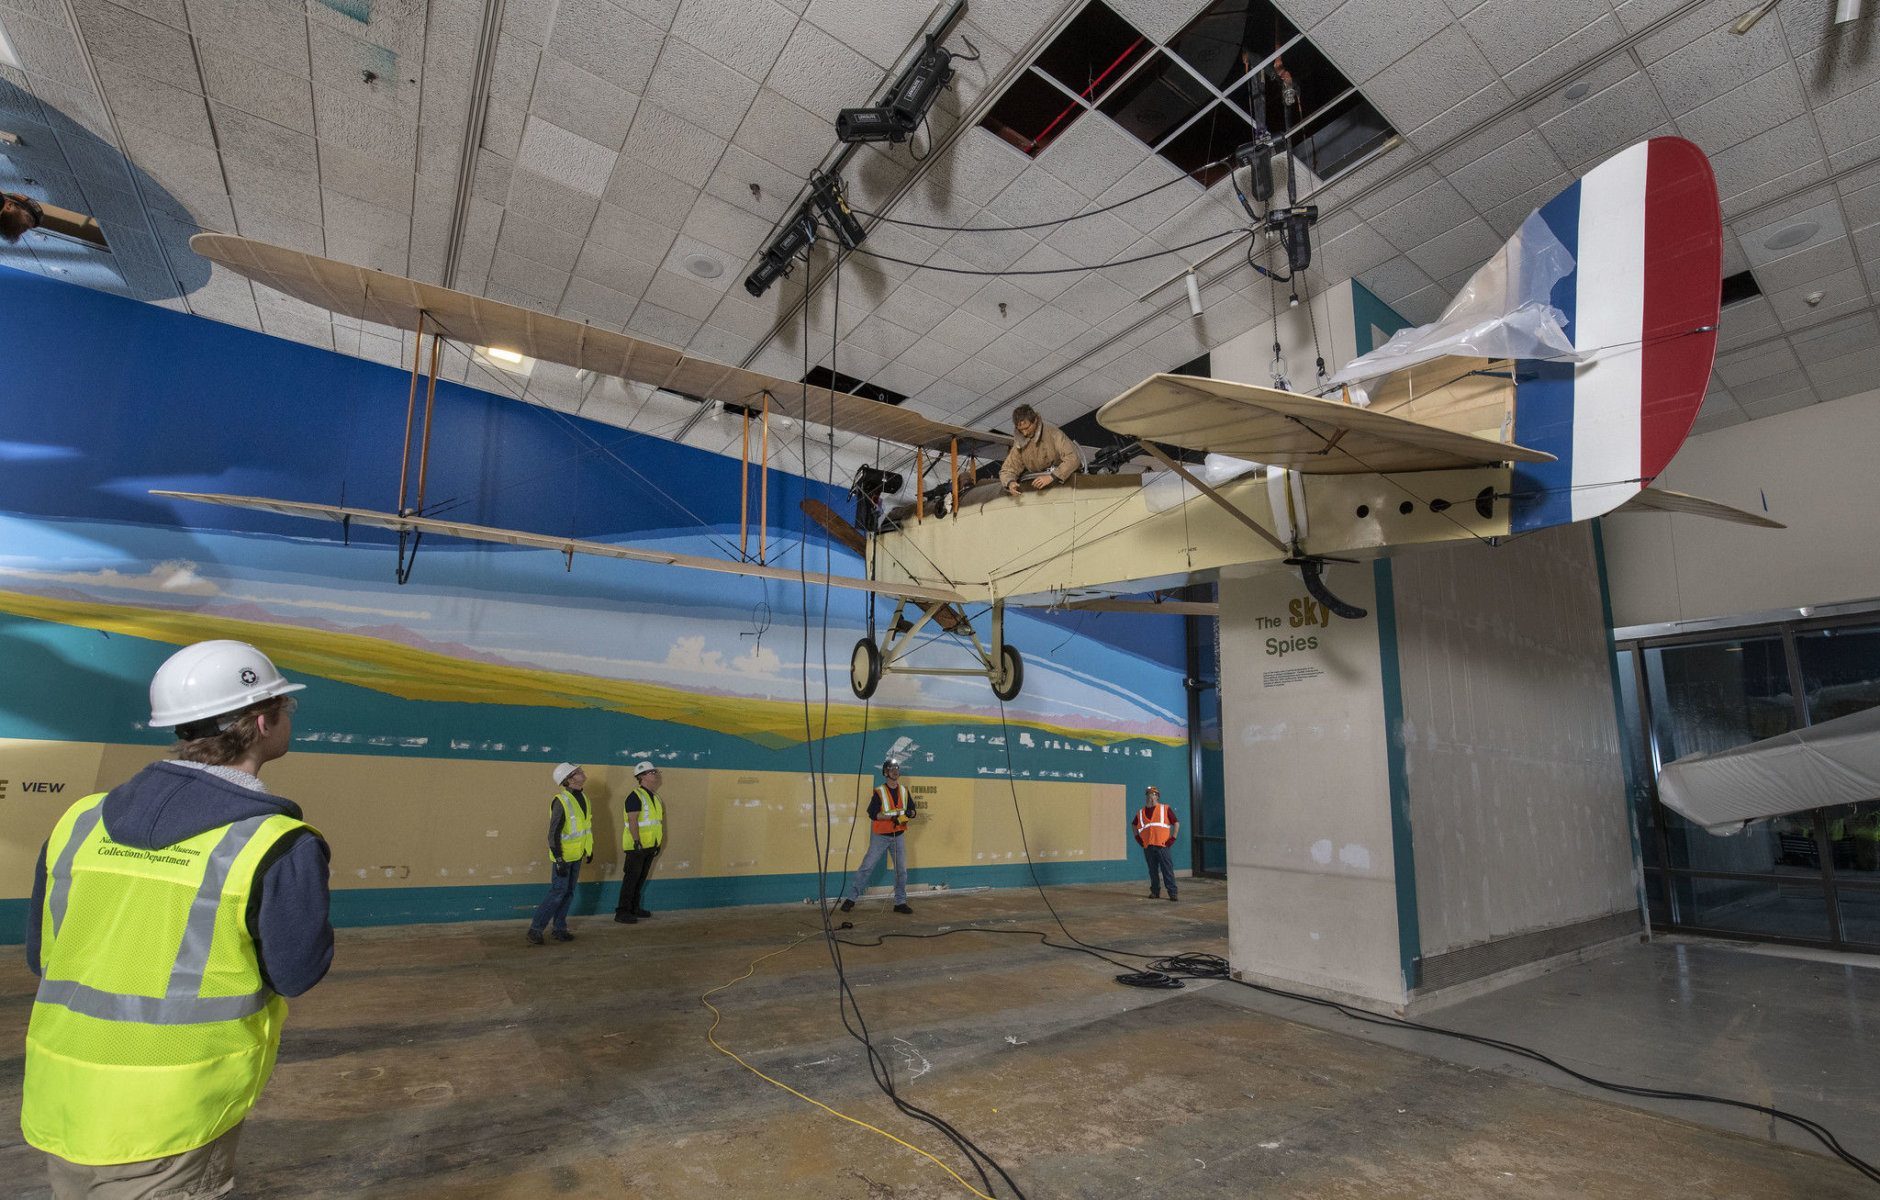 National Air and Space Museum staff and contractors from iWeiss; Century Aviation; and Crozier Fine Arts, work to lower the De Havilland DH-4 aircraft in the closed Looking at Earth gallery of the National Air and Space museum in Washington, DC, February 12, 2019. (Smithsonian  photo by Jim Preston)  Material is subject to Smithsonian Terms of Use. Should you wish to use National Air and Space material in any medium, please submit an Application for Permission to Reproduce NASM Material, available at:  https://airandspace.si.edu/permissions